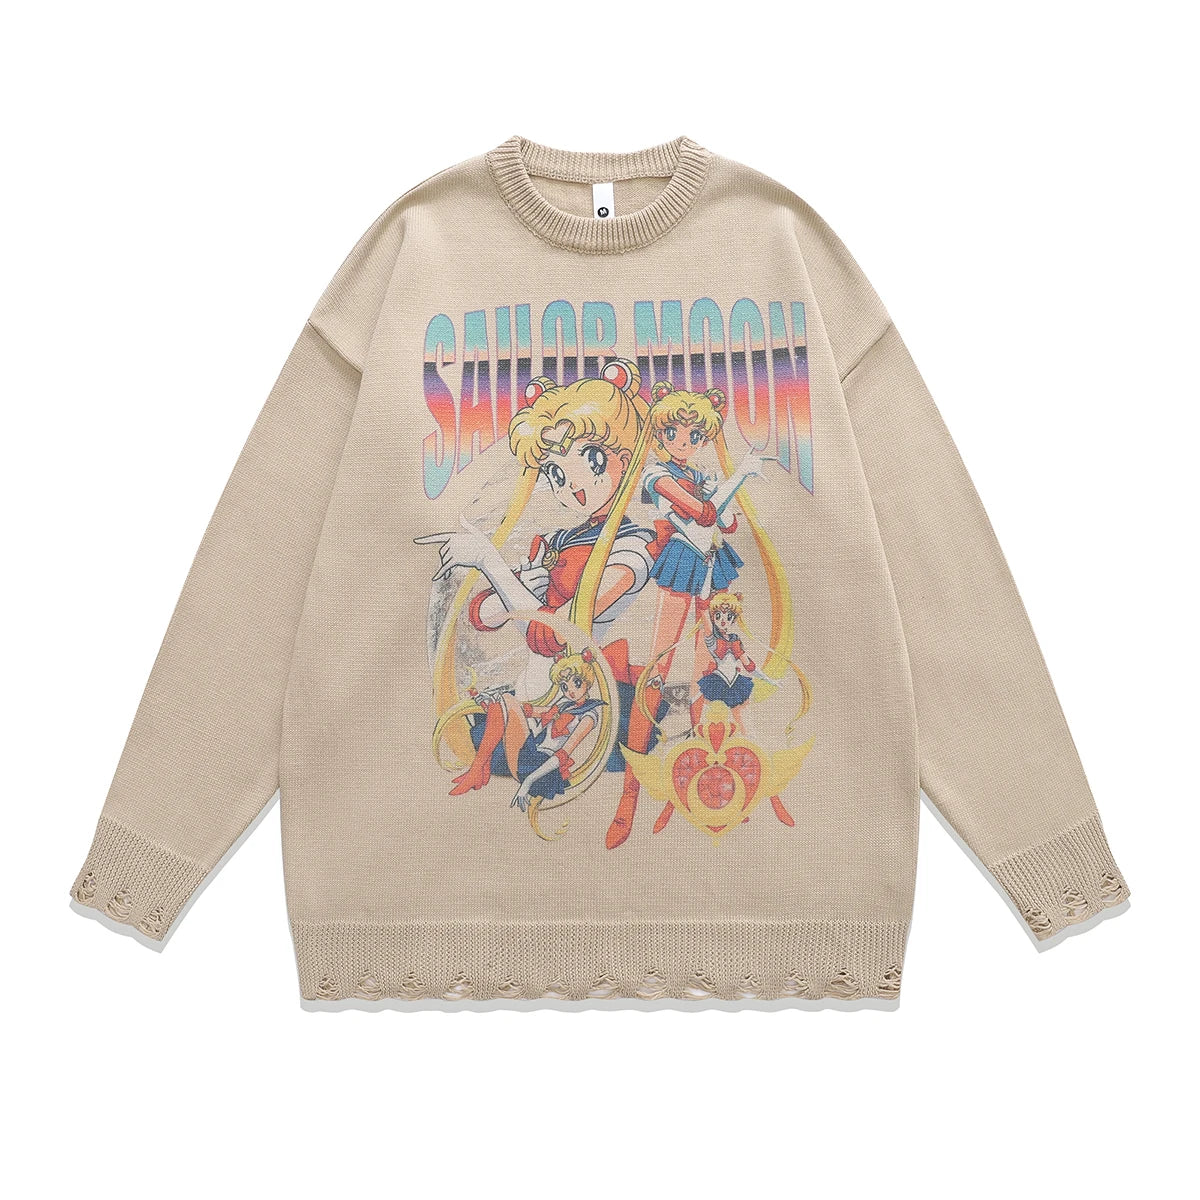 Anime New Jeans Sweater Apricot 3